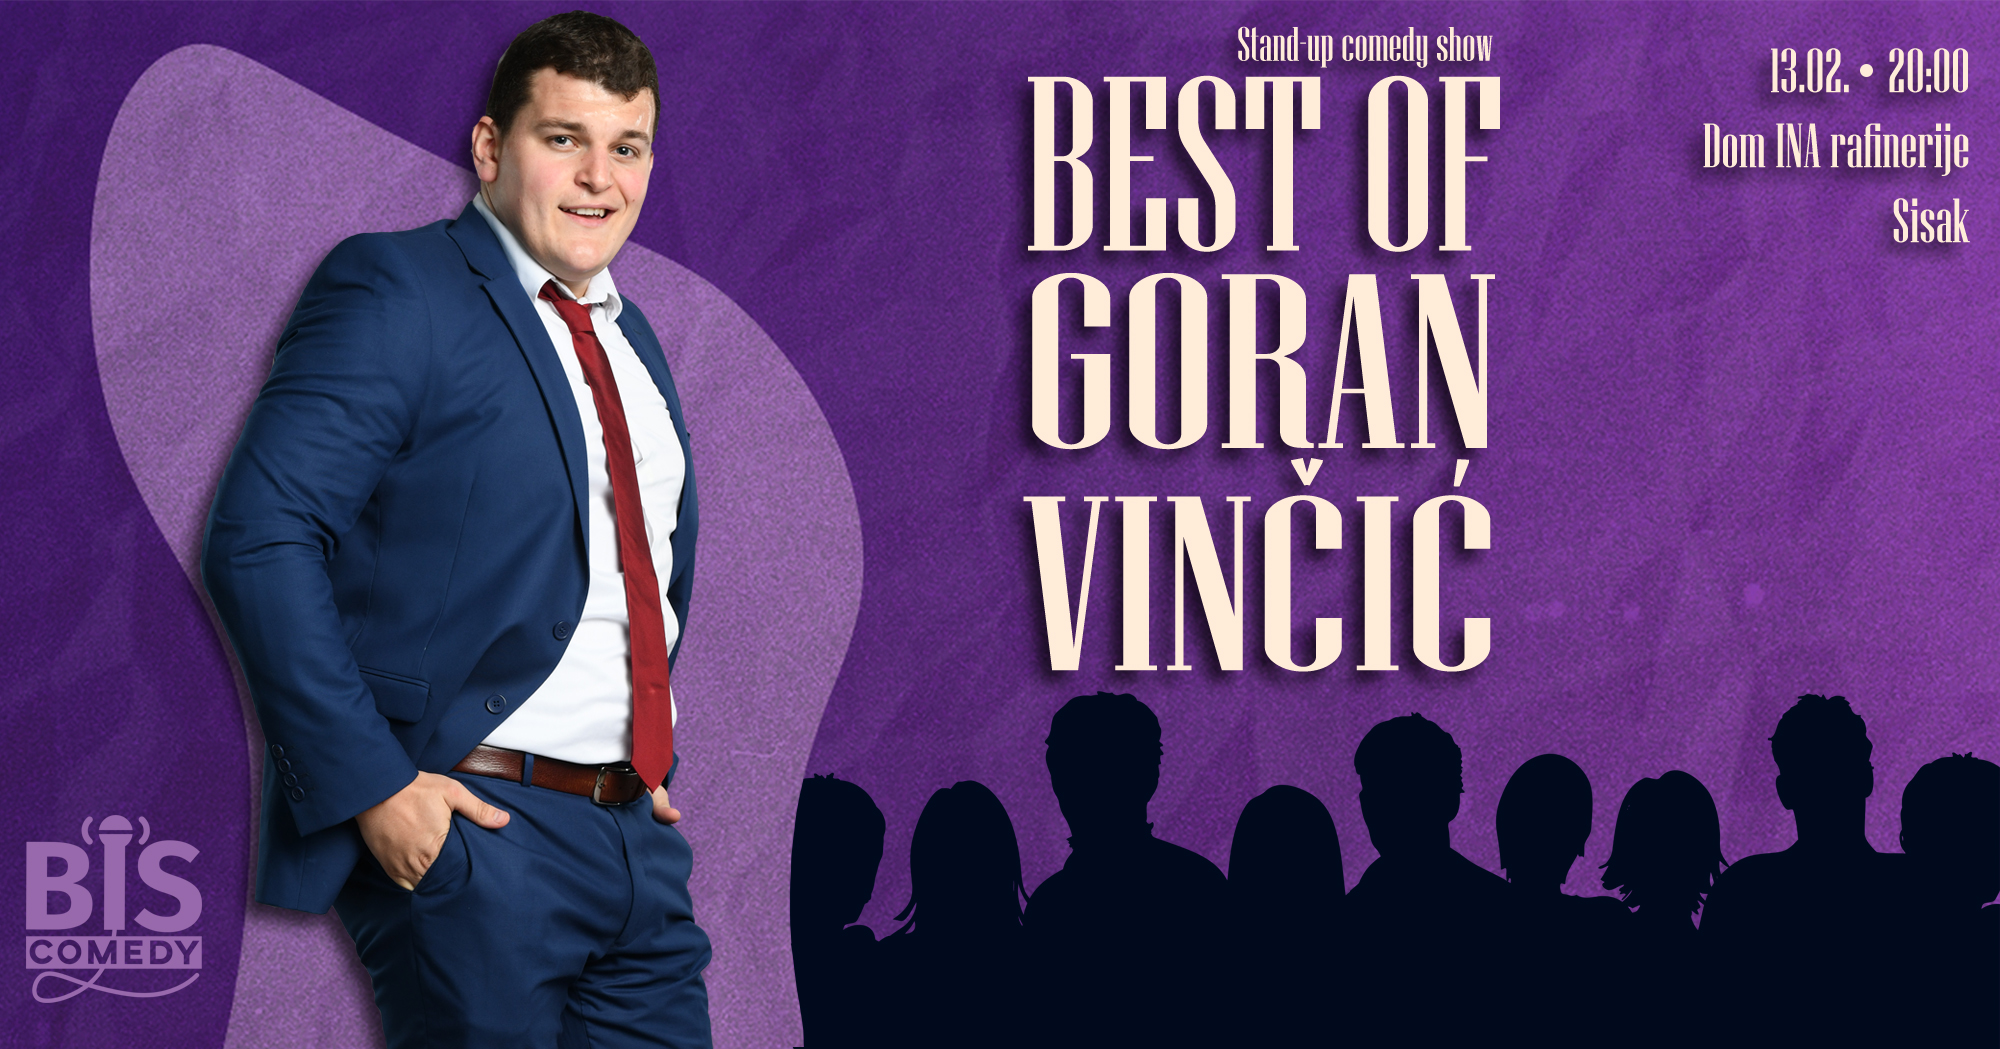 You are currently viewing Sisak: Goran Vinčić – BEST OF stand up comedy show @Dom INA rafinerije